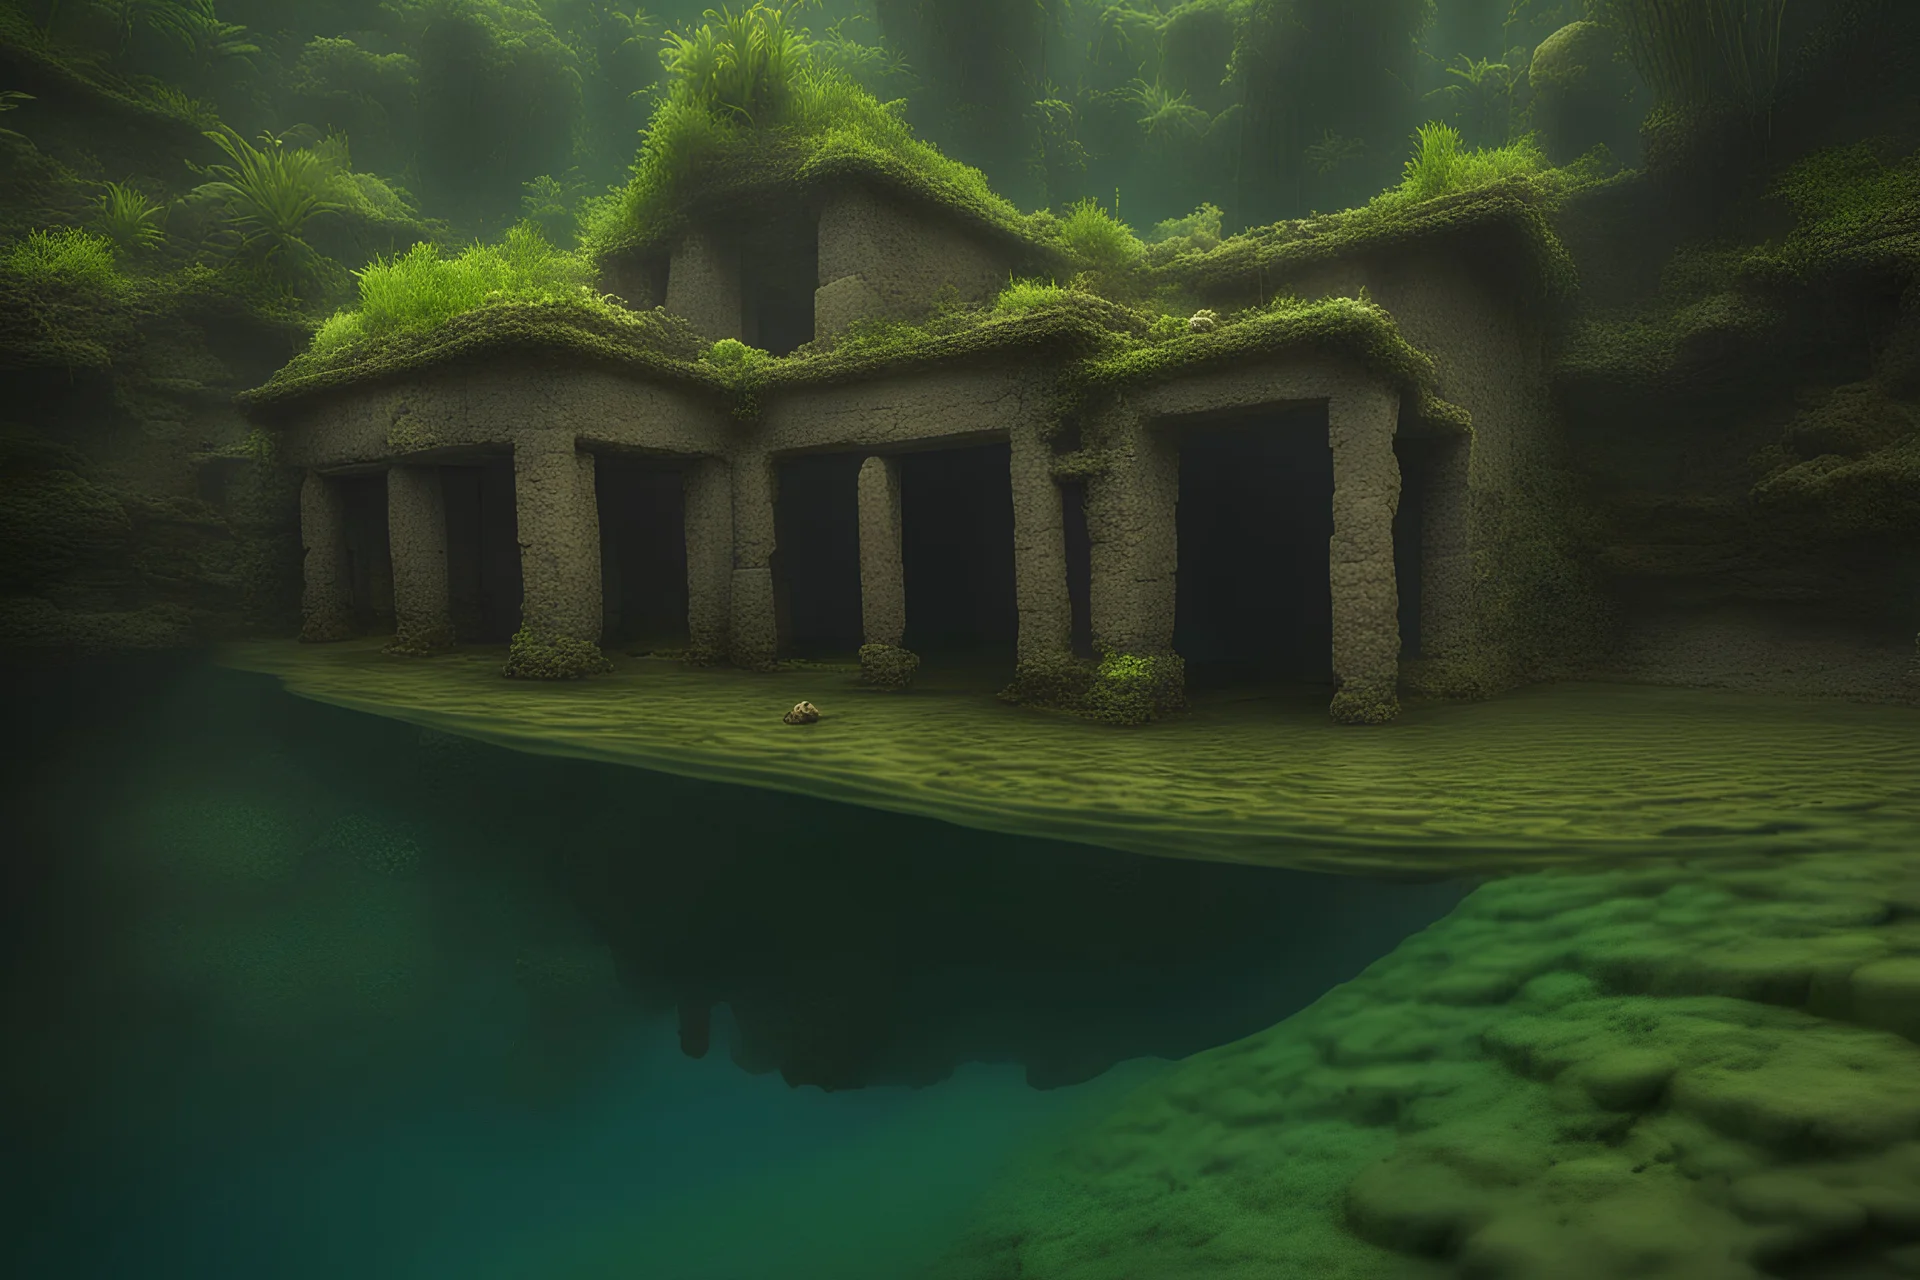 underwater ruins of an old small village with small ruined huts